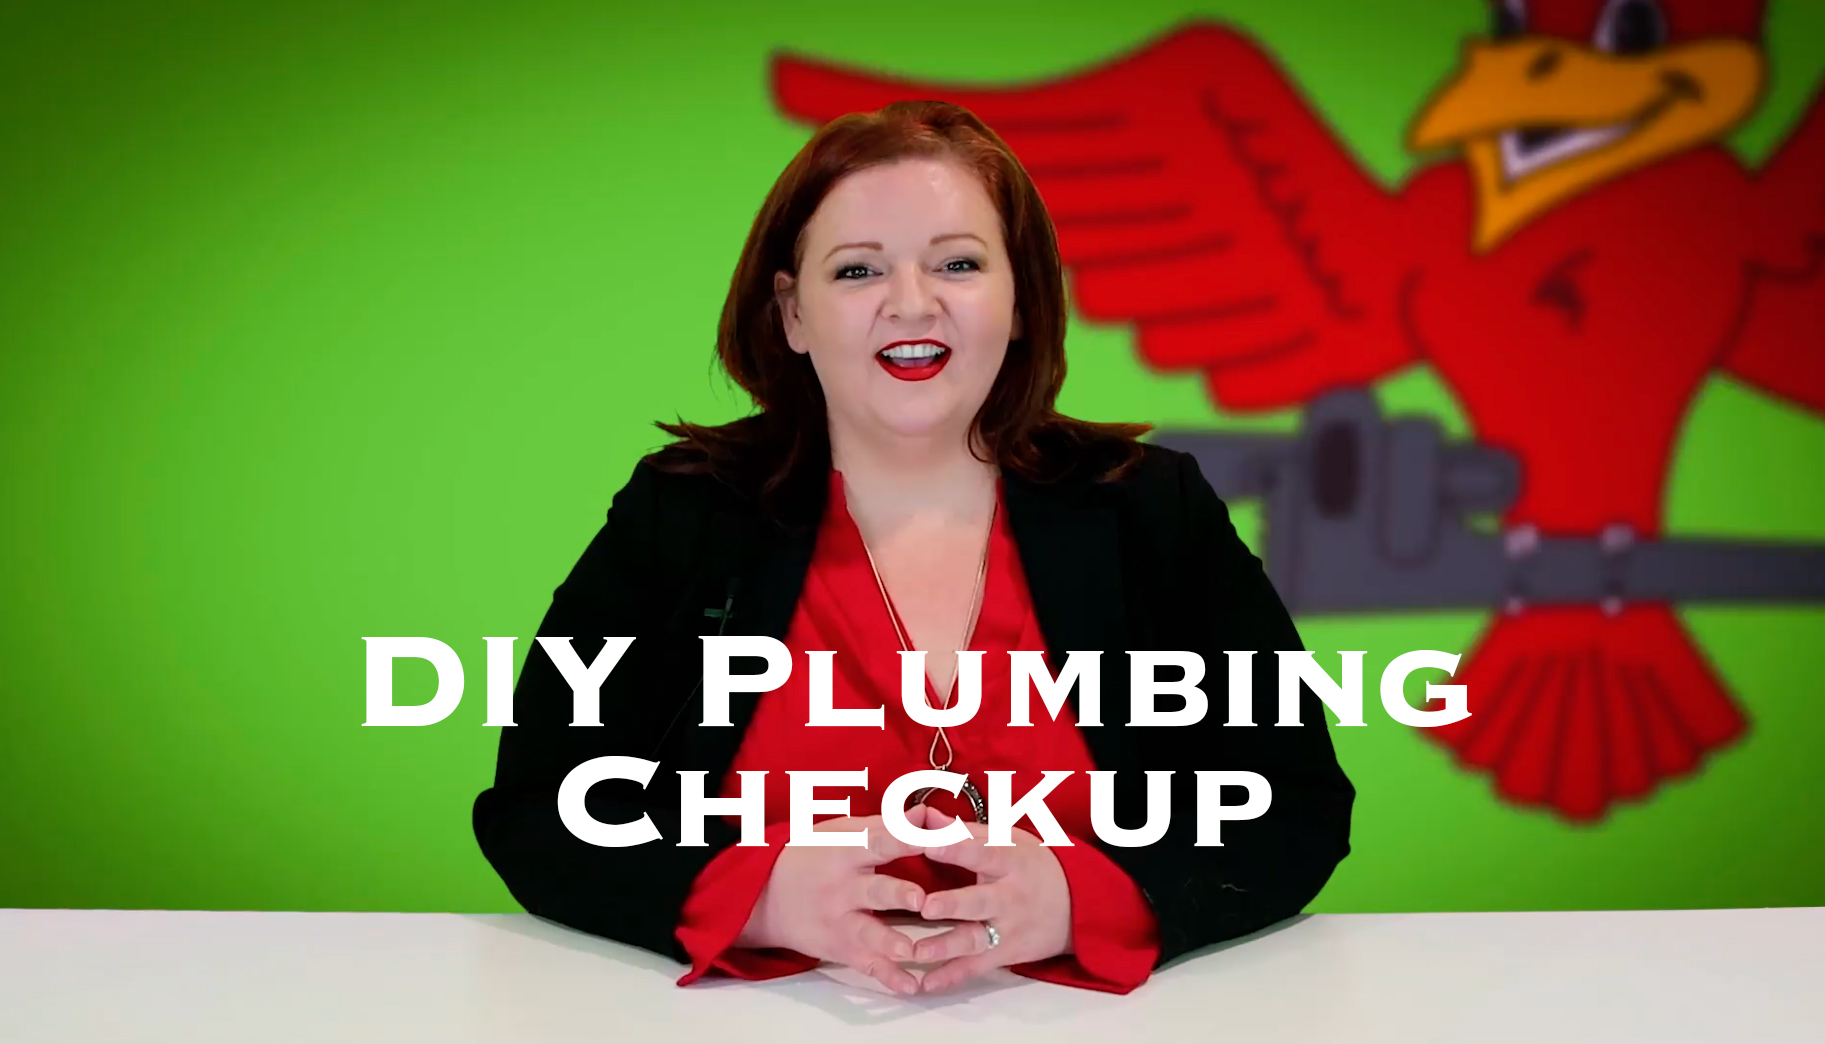 Cover photo for blog and video "DIY Plumbing Checkup"